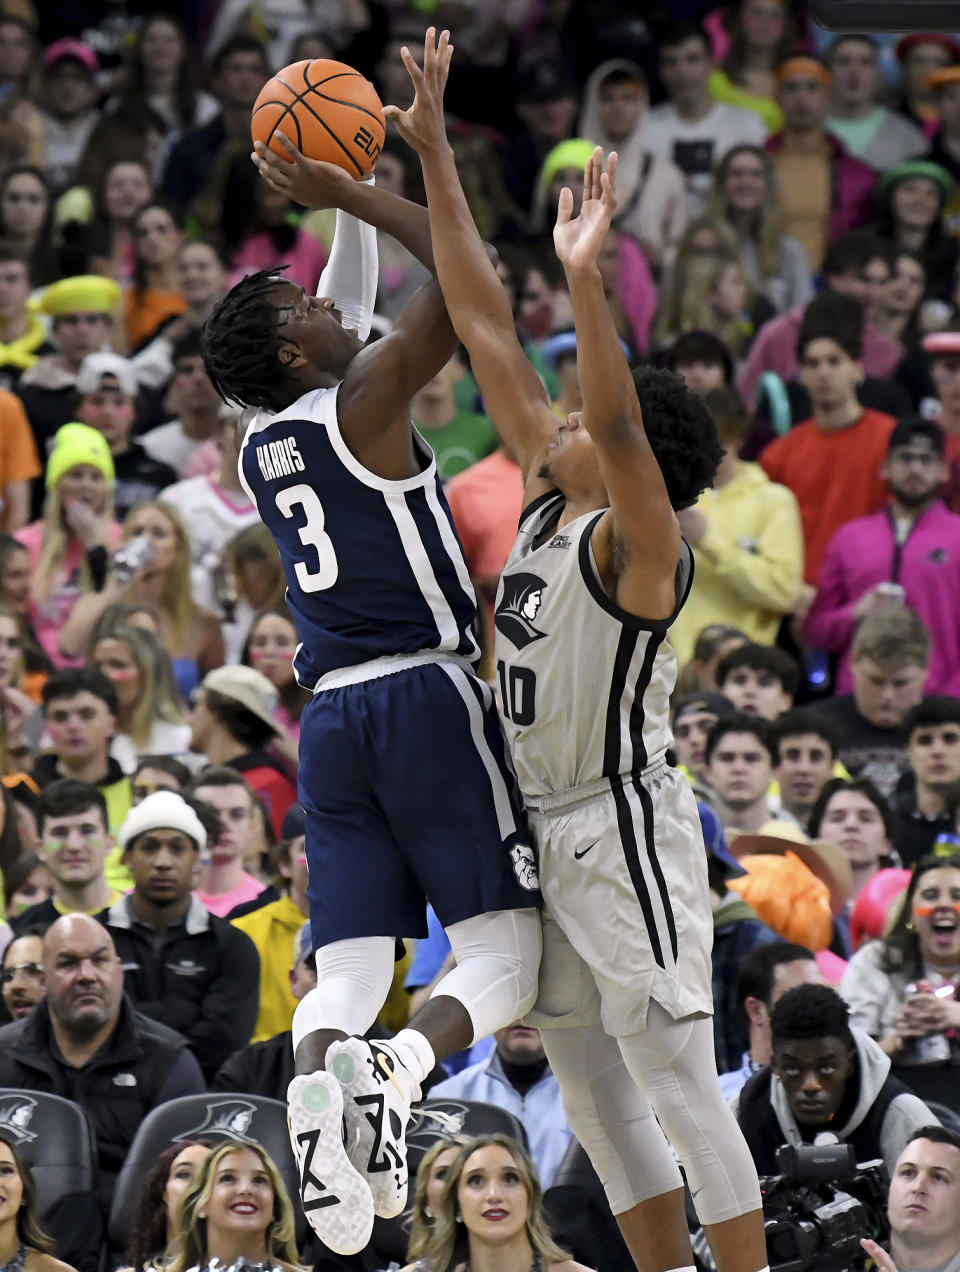 Providence's Noah Locke (10) attempts to block a shot by Butler's Chuck Harris (3) during the first half of an NCAA college basketball game, Wednesday, Jan. 25, 2023, in Providence, R.I. (AP Photo/Mark Stockwell)